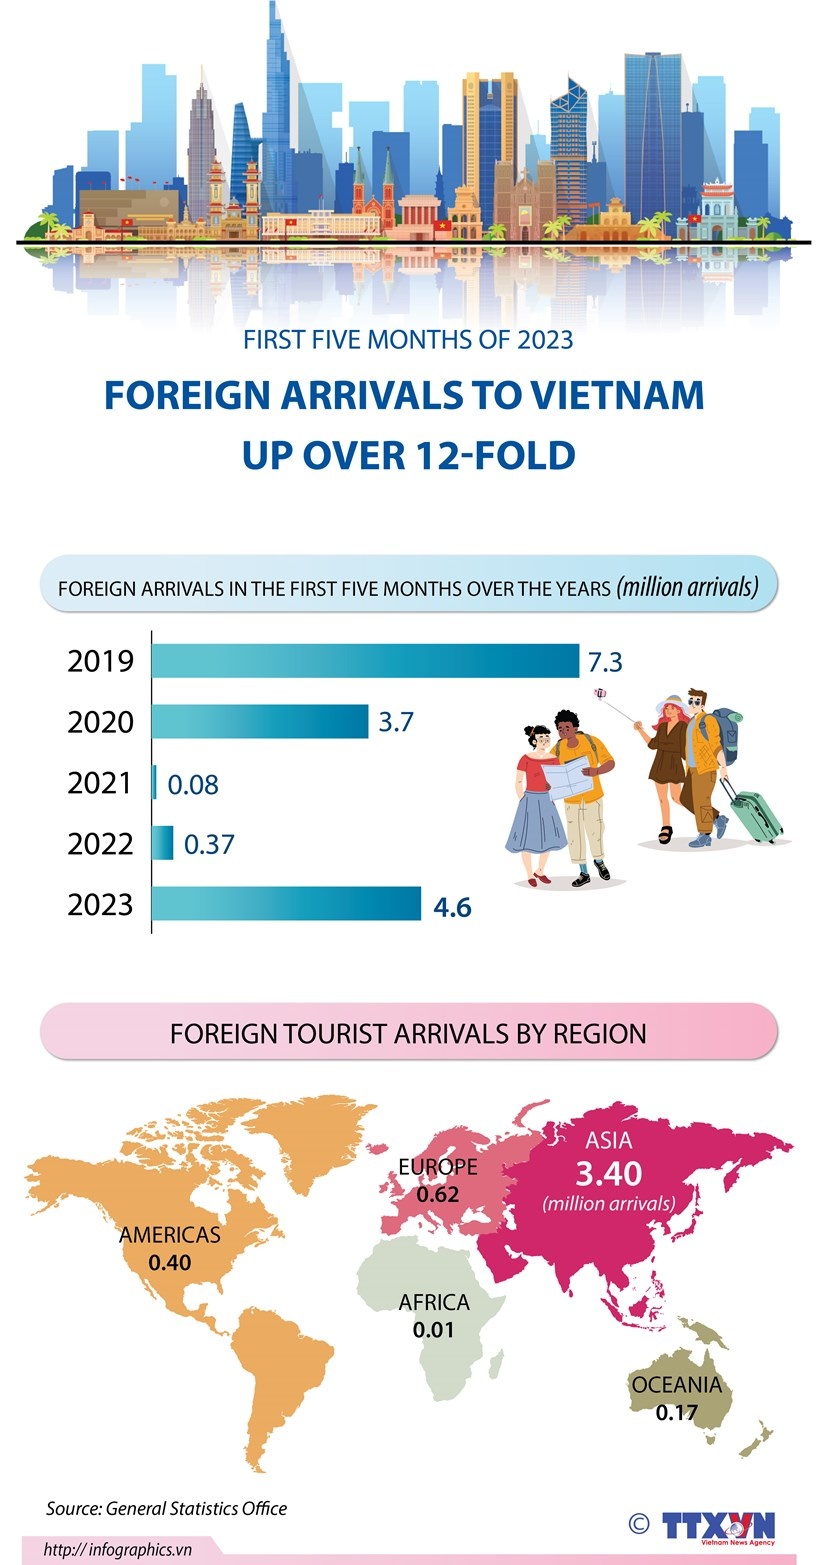 Foreign arrivals to Vietnam up over 12-fold